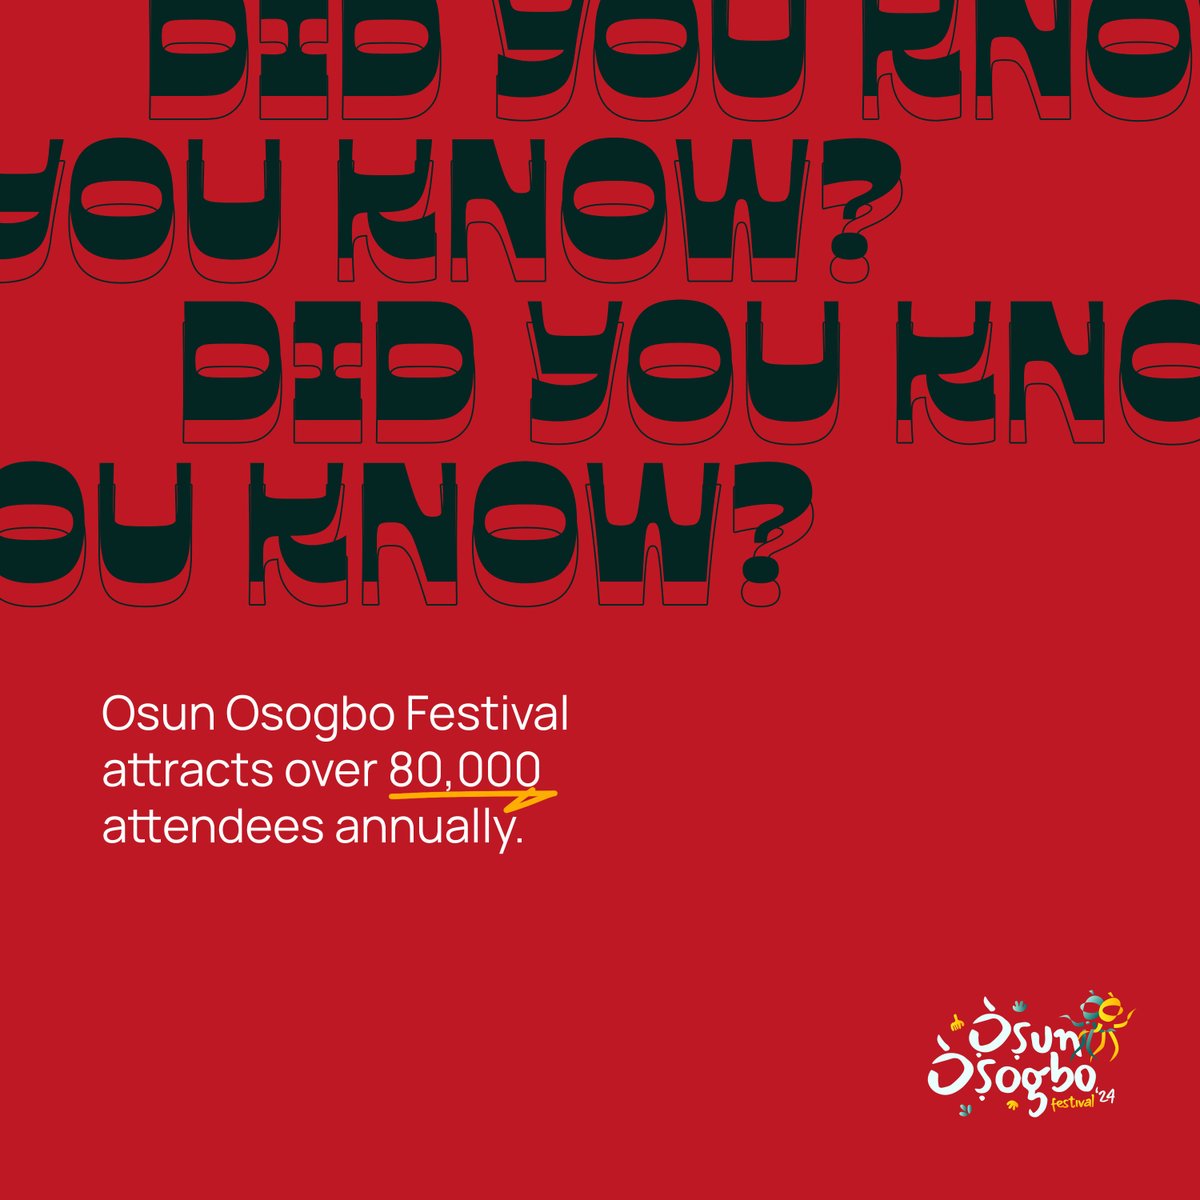 Did you know ? Over 80,000 people attends this annual celebration of Yoruba culture and heritage - making it one of the largest cultural festivals in Nigeria. Don't miss your chance to be part of this extraordinary event in Osogbo this August! #osunosogbofestival24